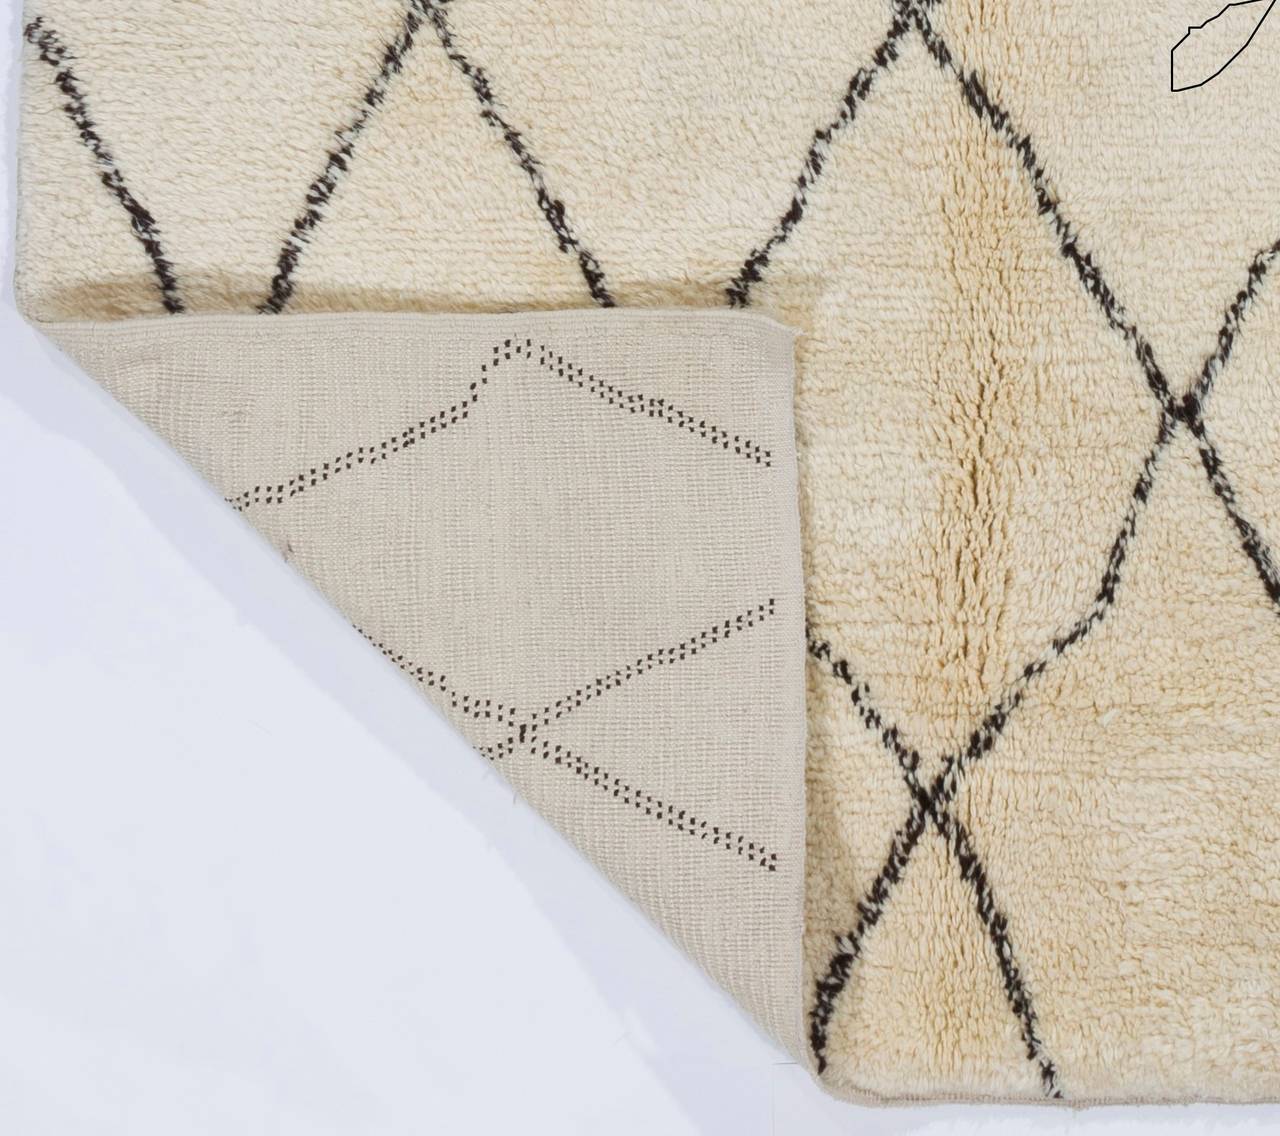 Hand-Knotted Contemporary Moroccan Rug Made of Natural Undyed Wool